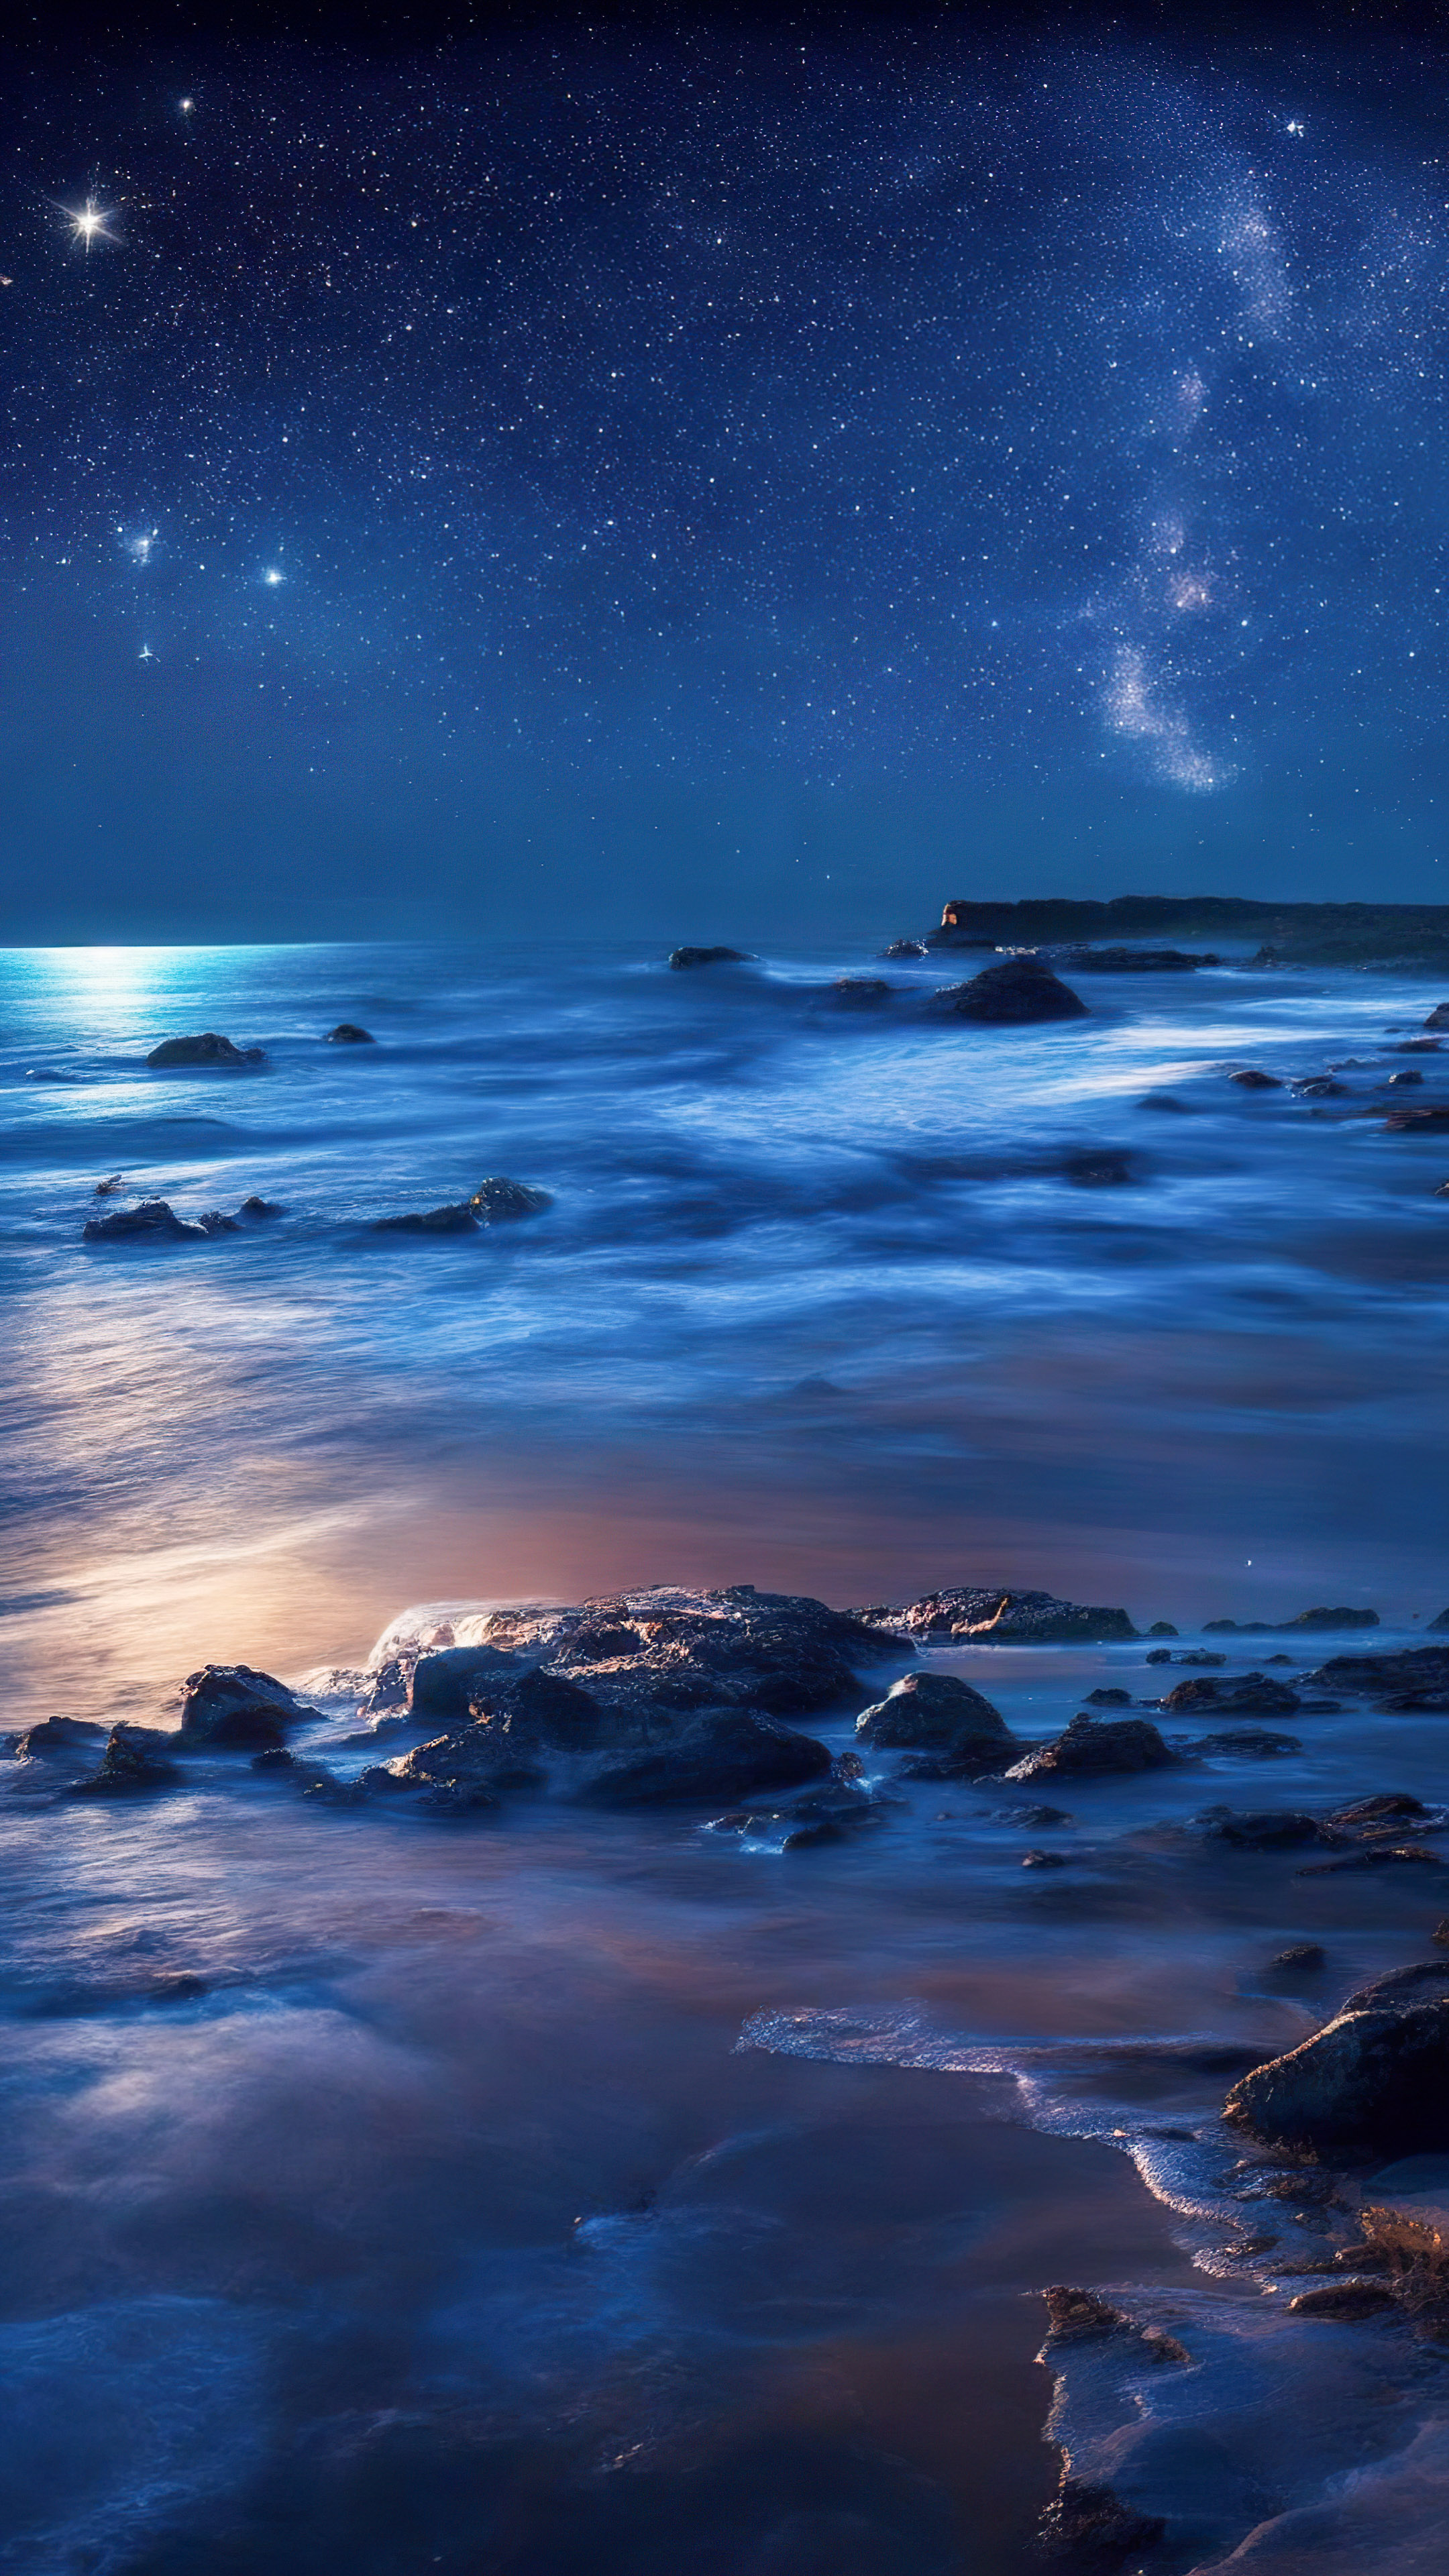 Experience the serenity of our oceanic night wallpaper, showcasing a secluded beach at night where waves caress the shore beneath a blanket of shimmering stars.